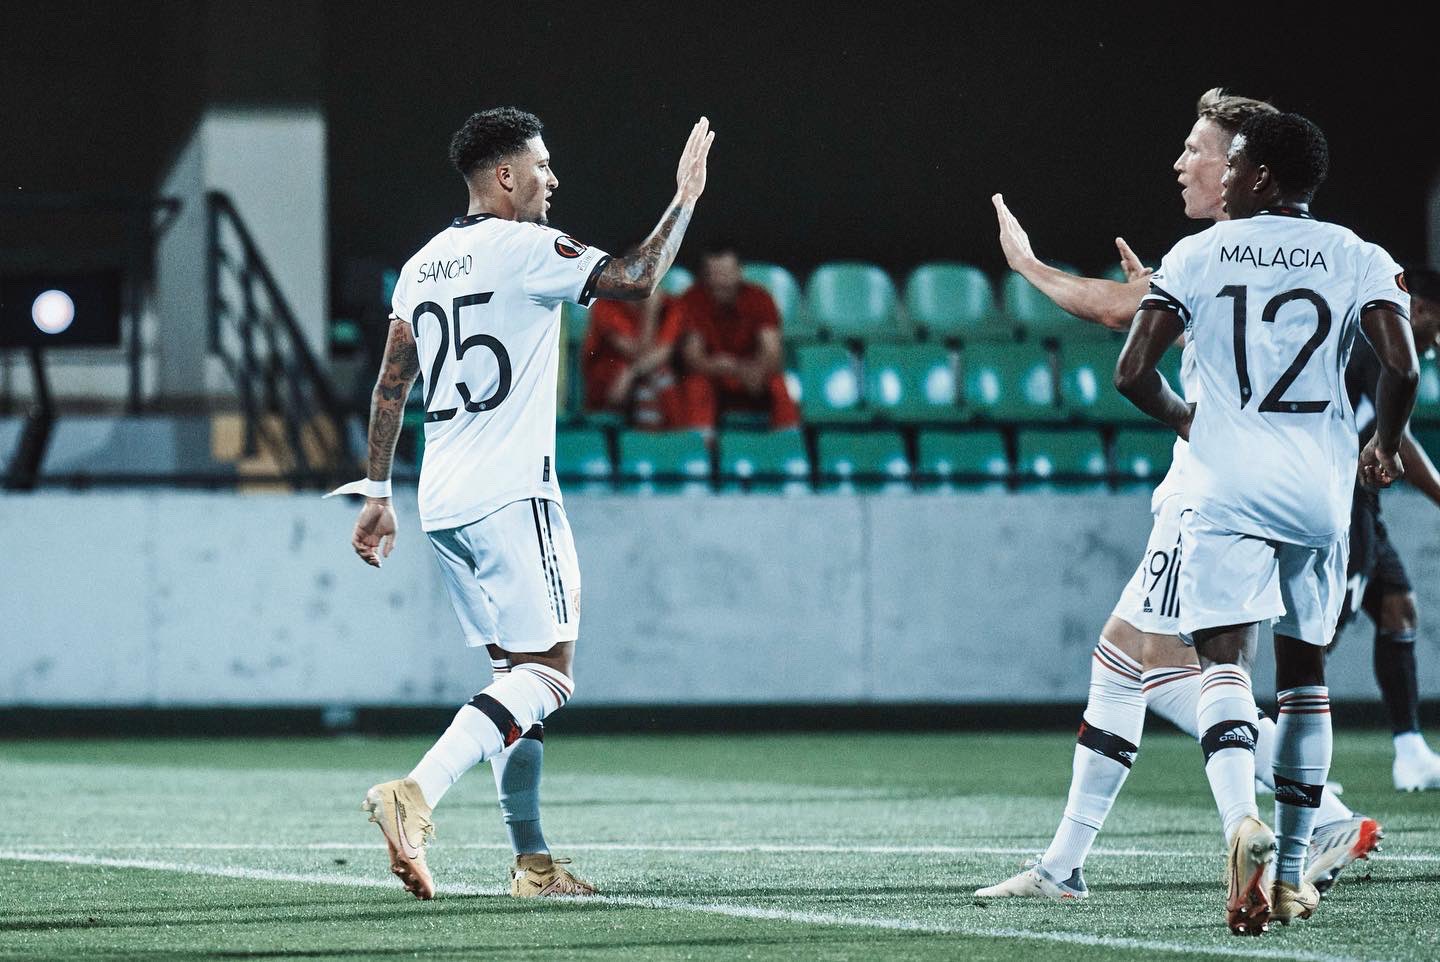 Sancho scored his third of the season (in eight games) for Manchester United at Sheriff Tiraspol with Ronaldo's penalty, completing a 2-0 win in Moldova.